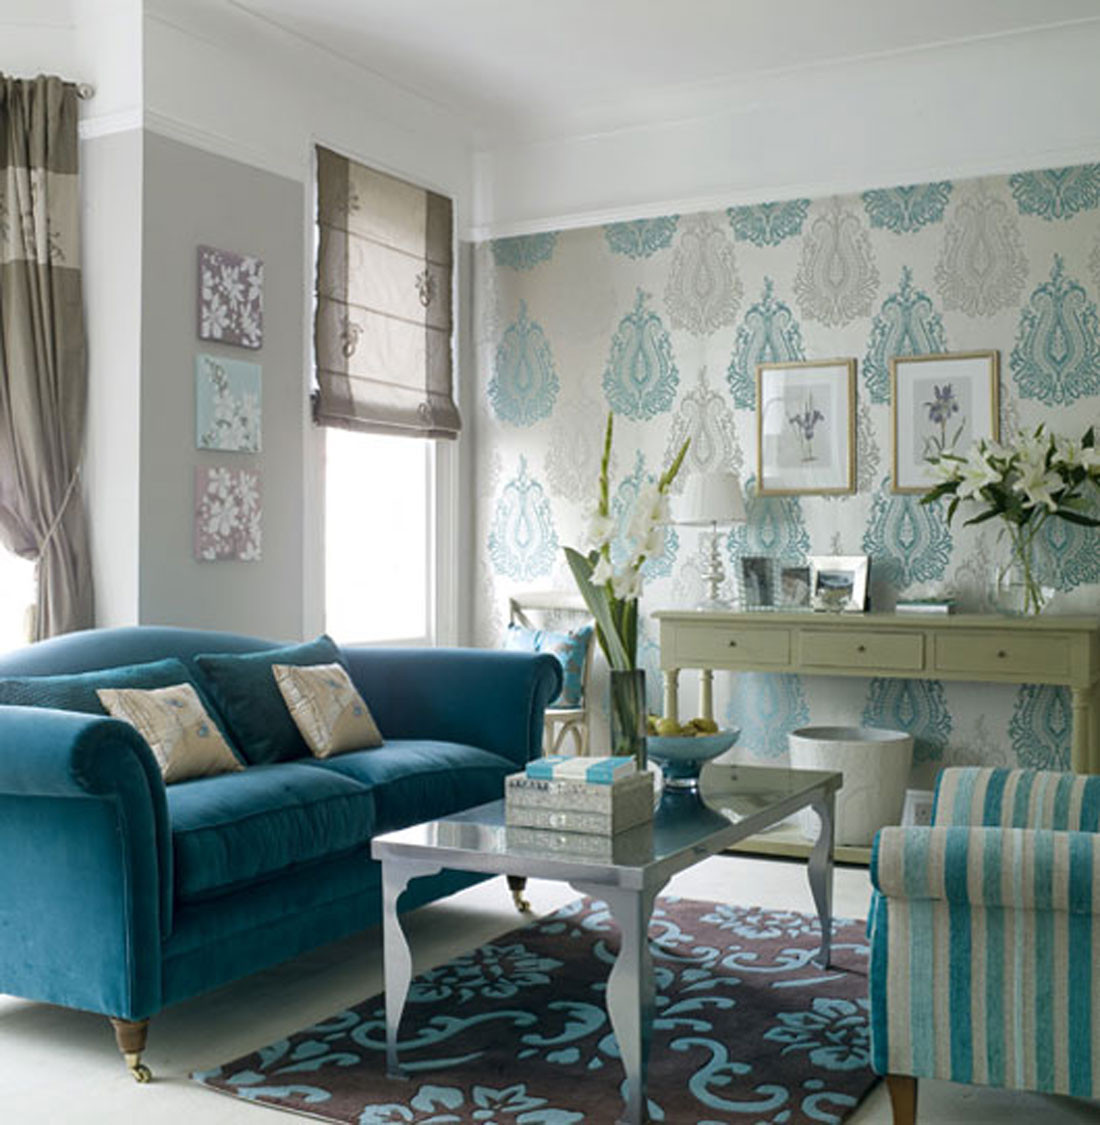 Turquoise Living Room Decorations
 The Texture of Teal and Turquoise – A Bold and Beautiful